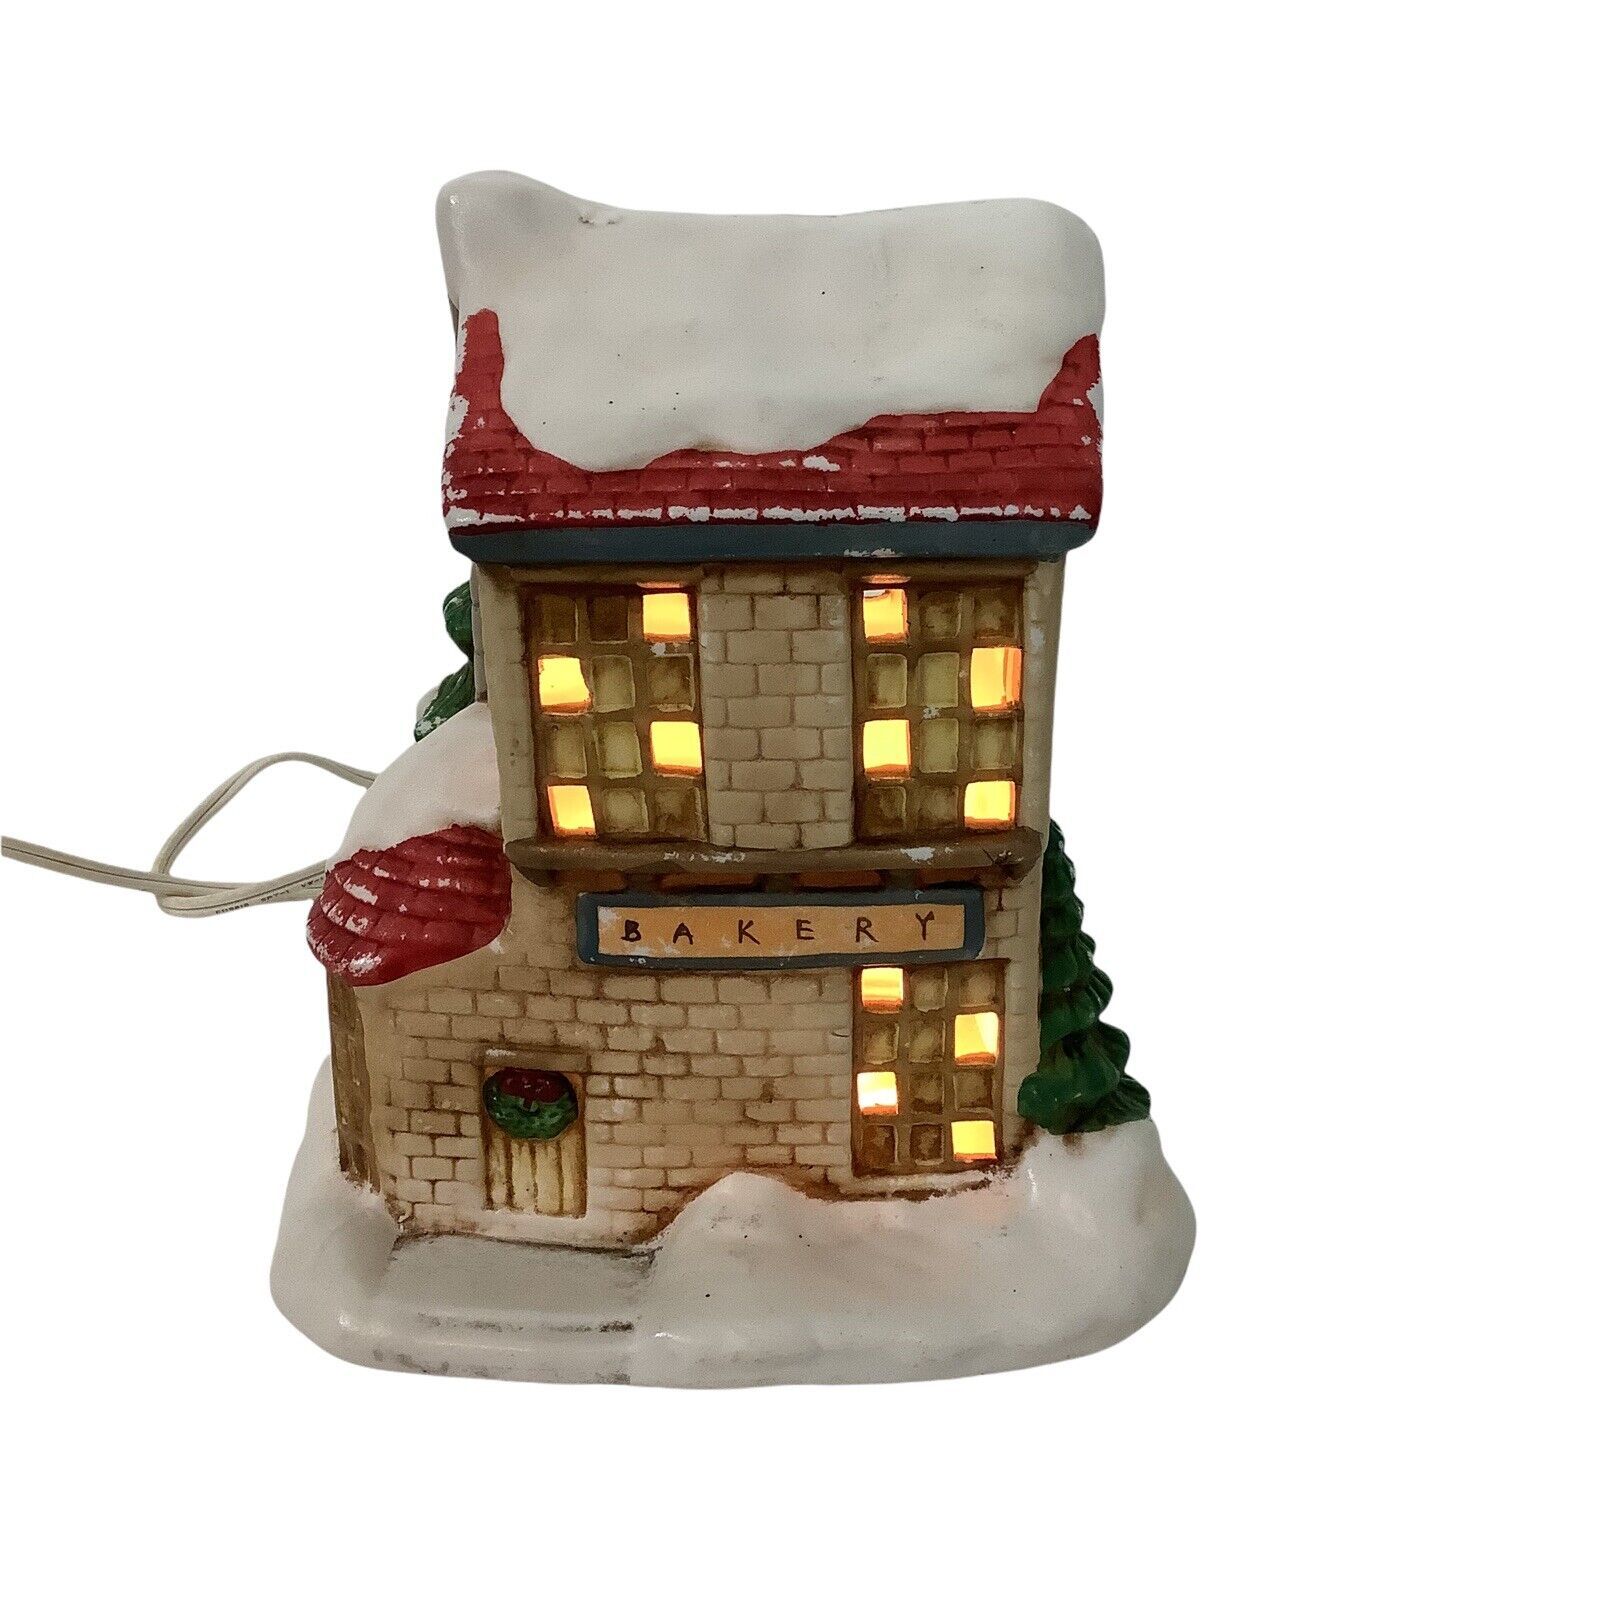 Lighted Bakery Two Story Christmas House Unbranded Ceramic Unboxed Vintage 1993 - $12.01